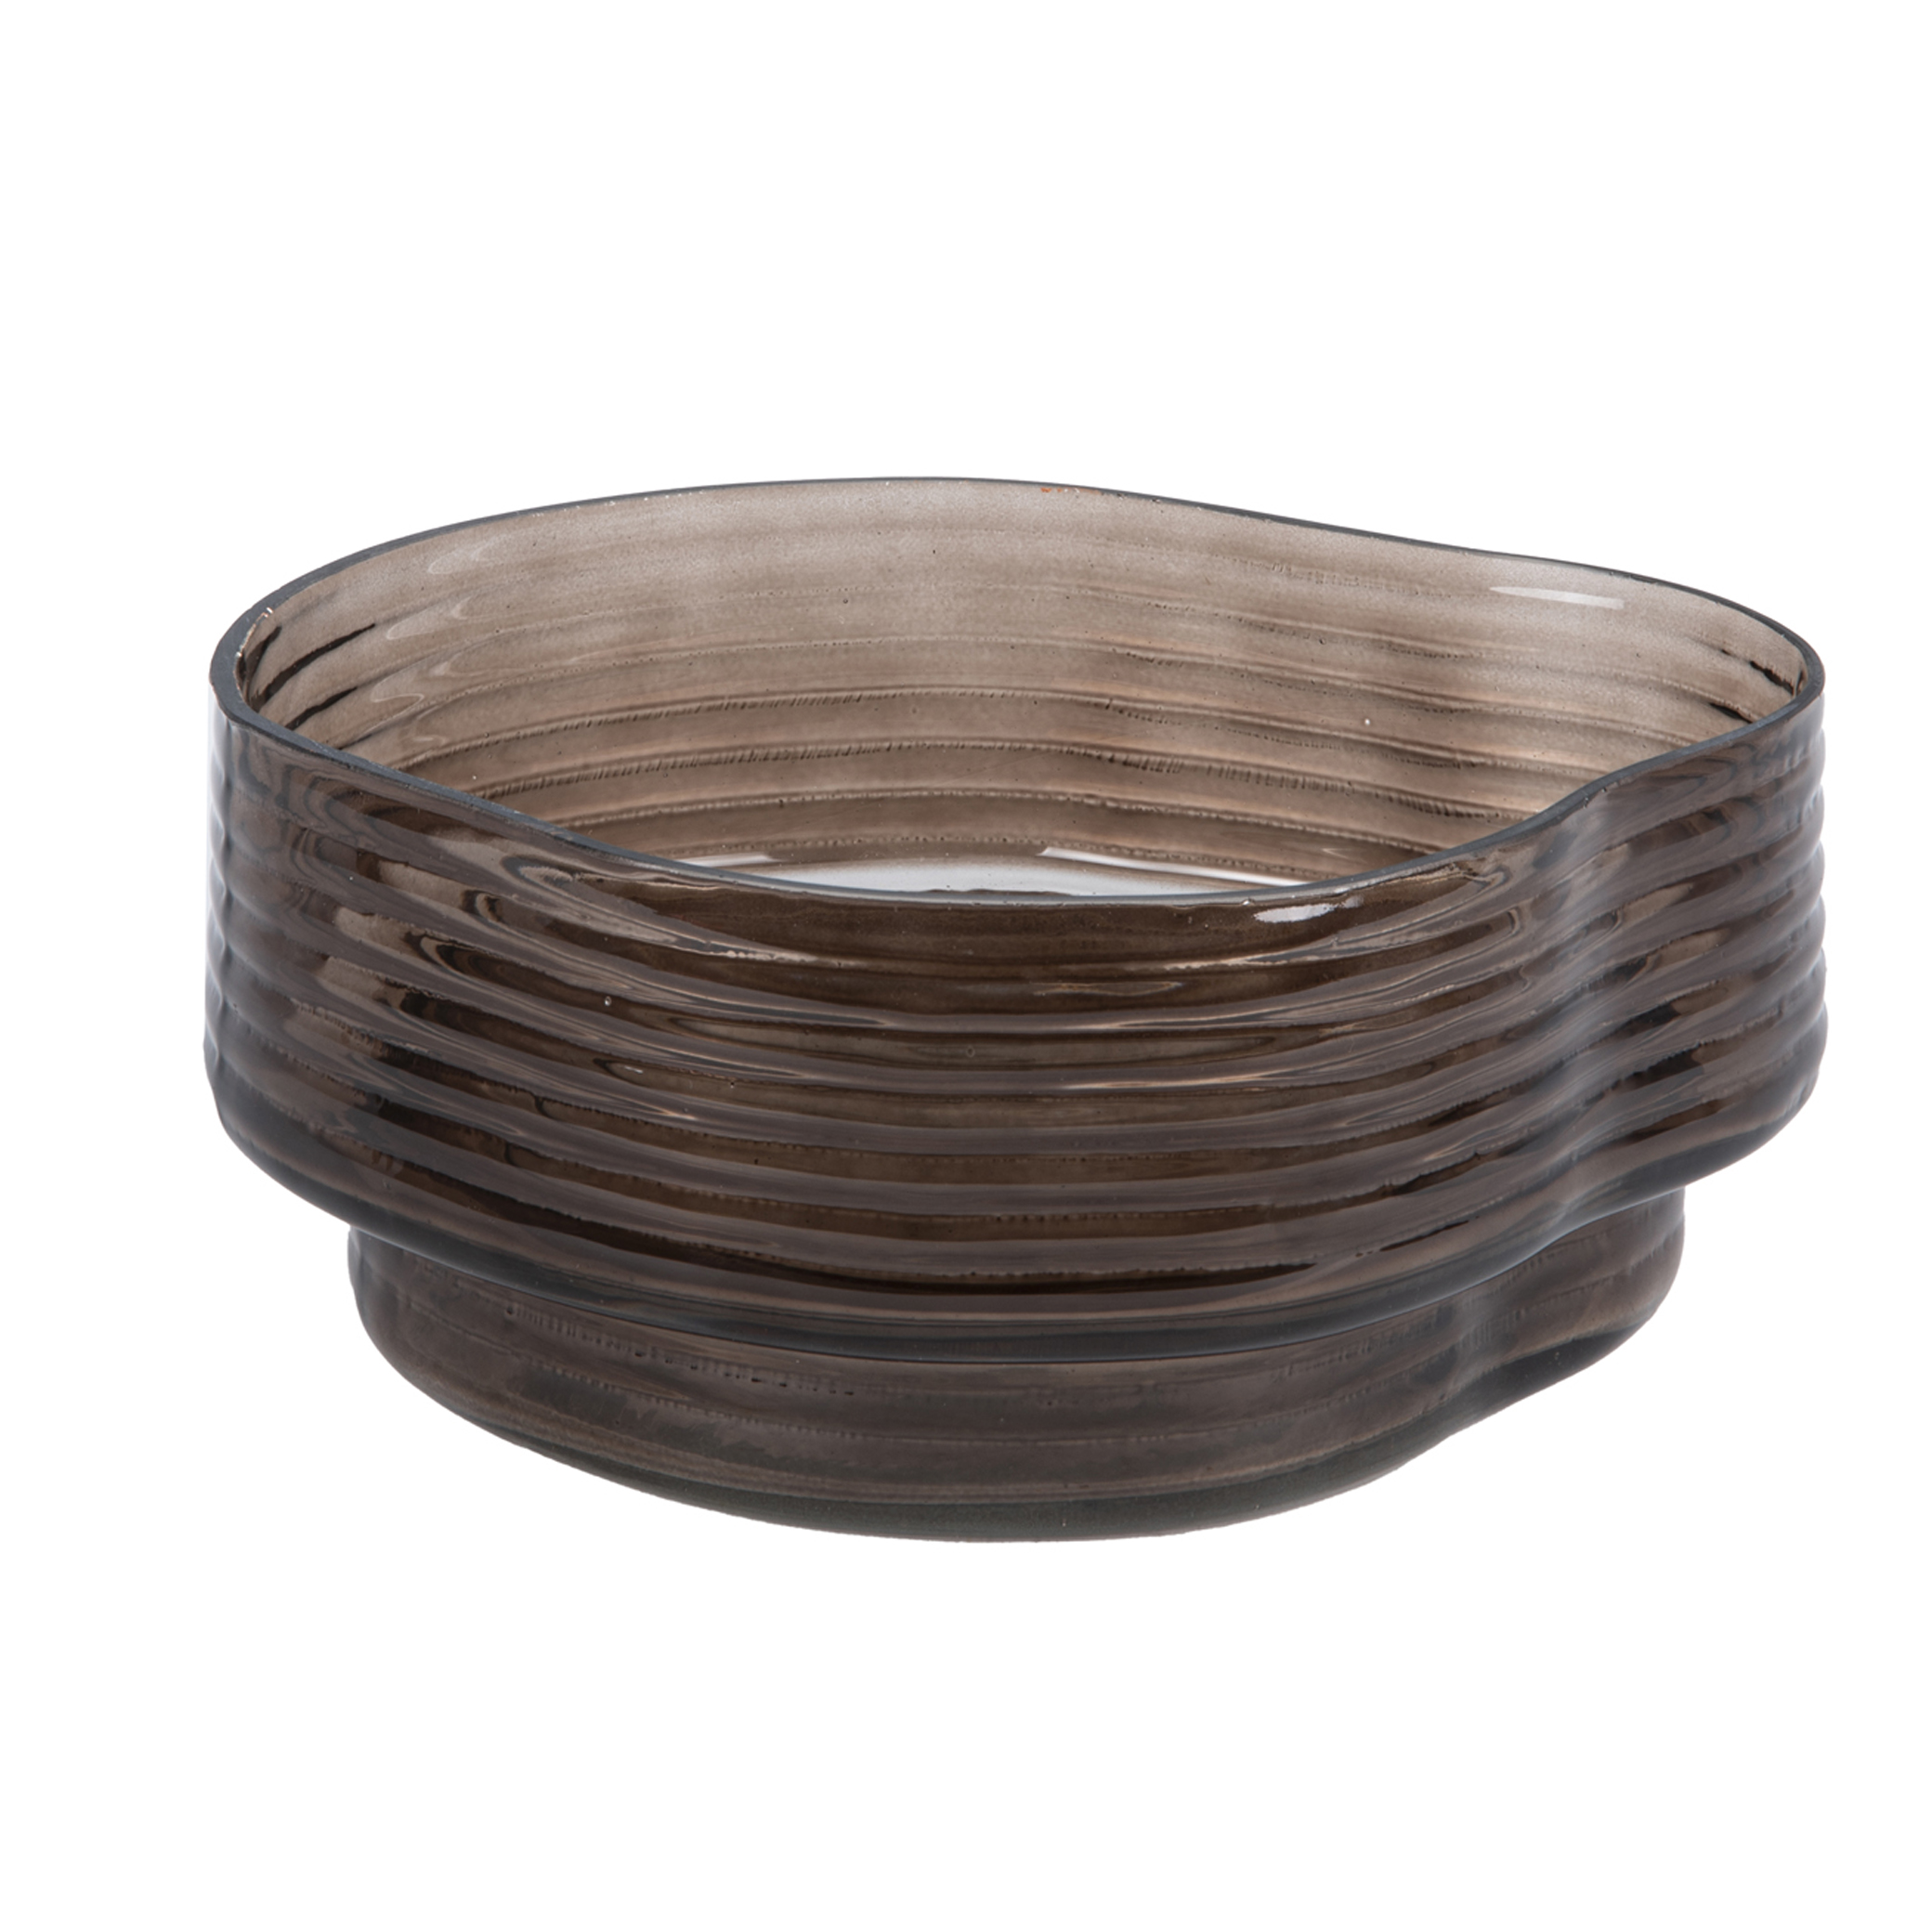 Present Time Wave Bowl - Chocolate Brown